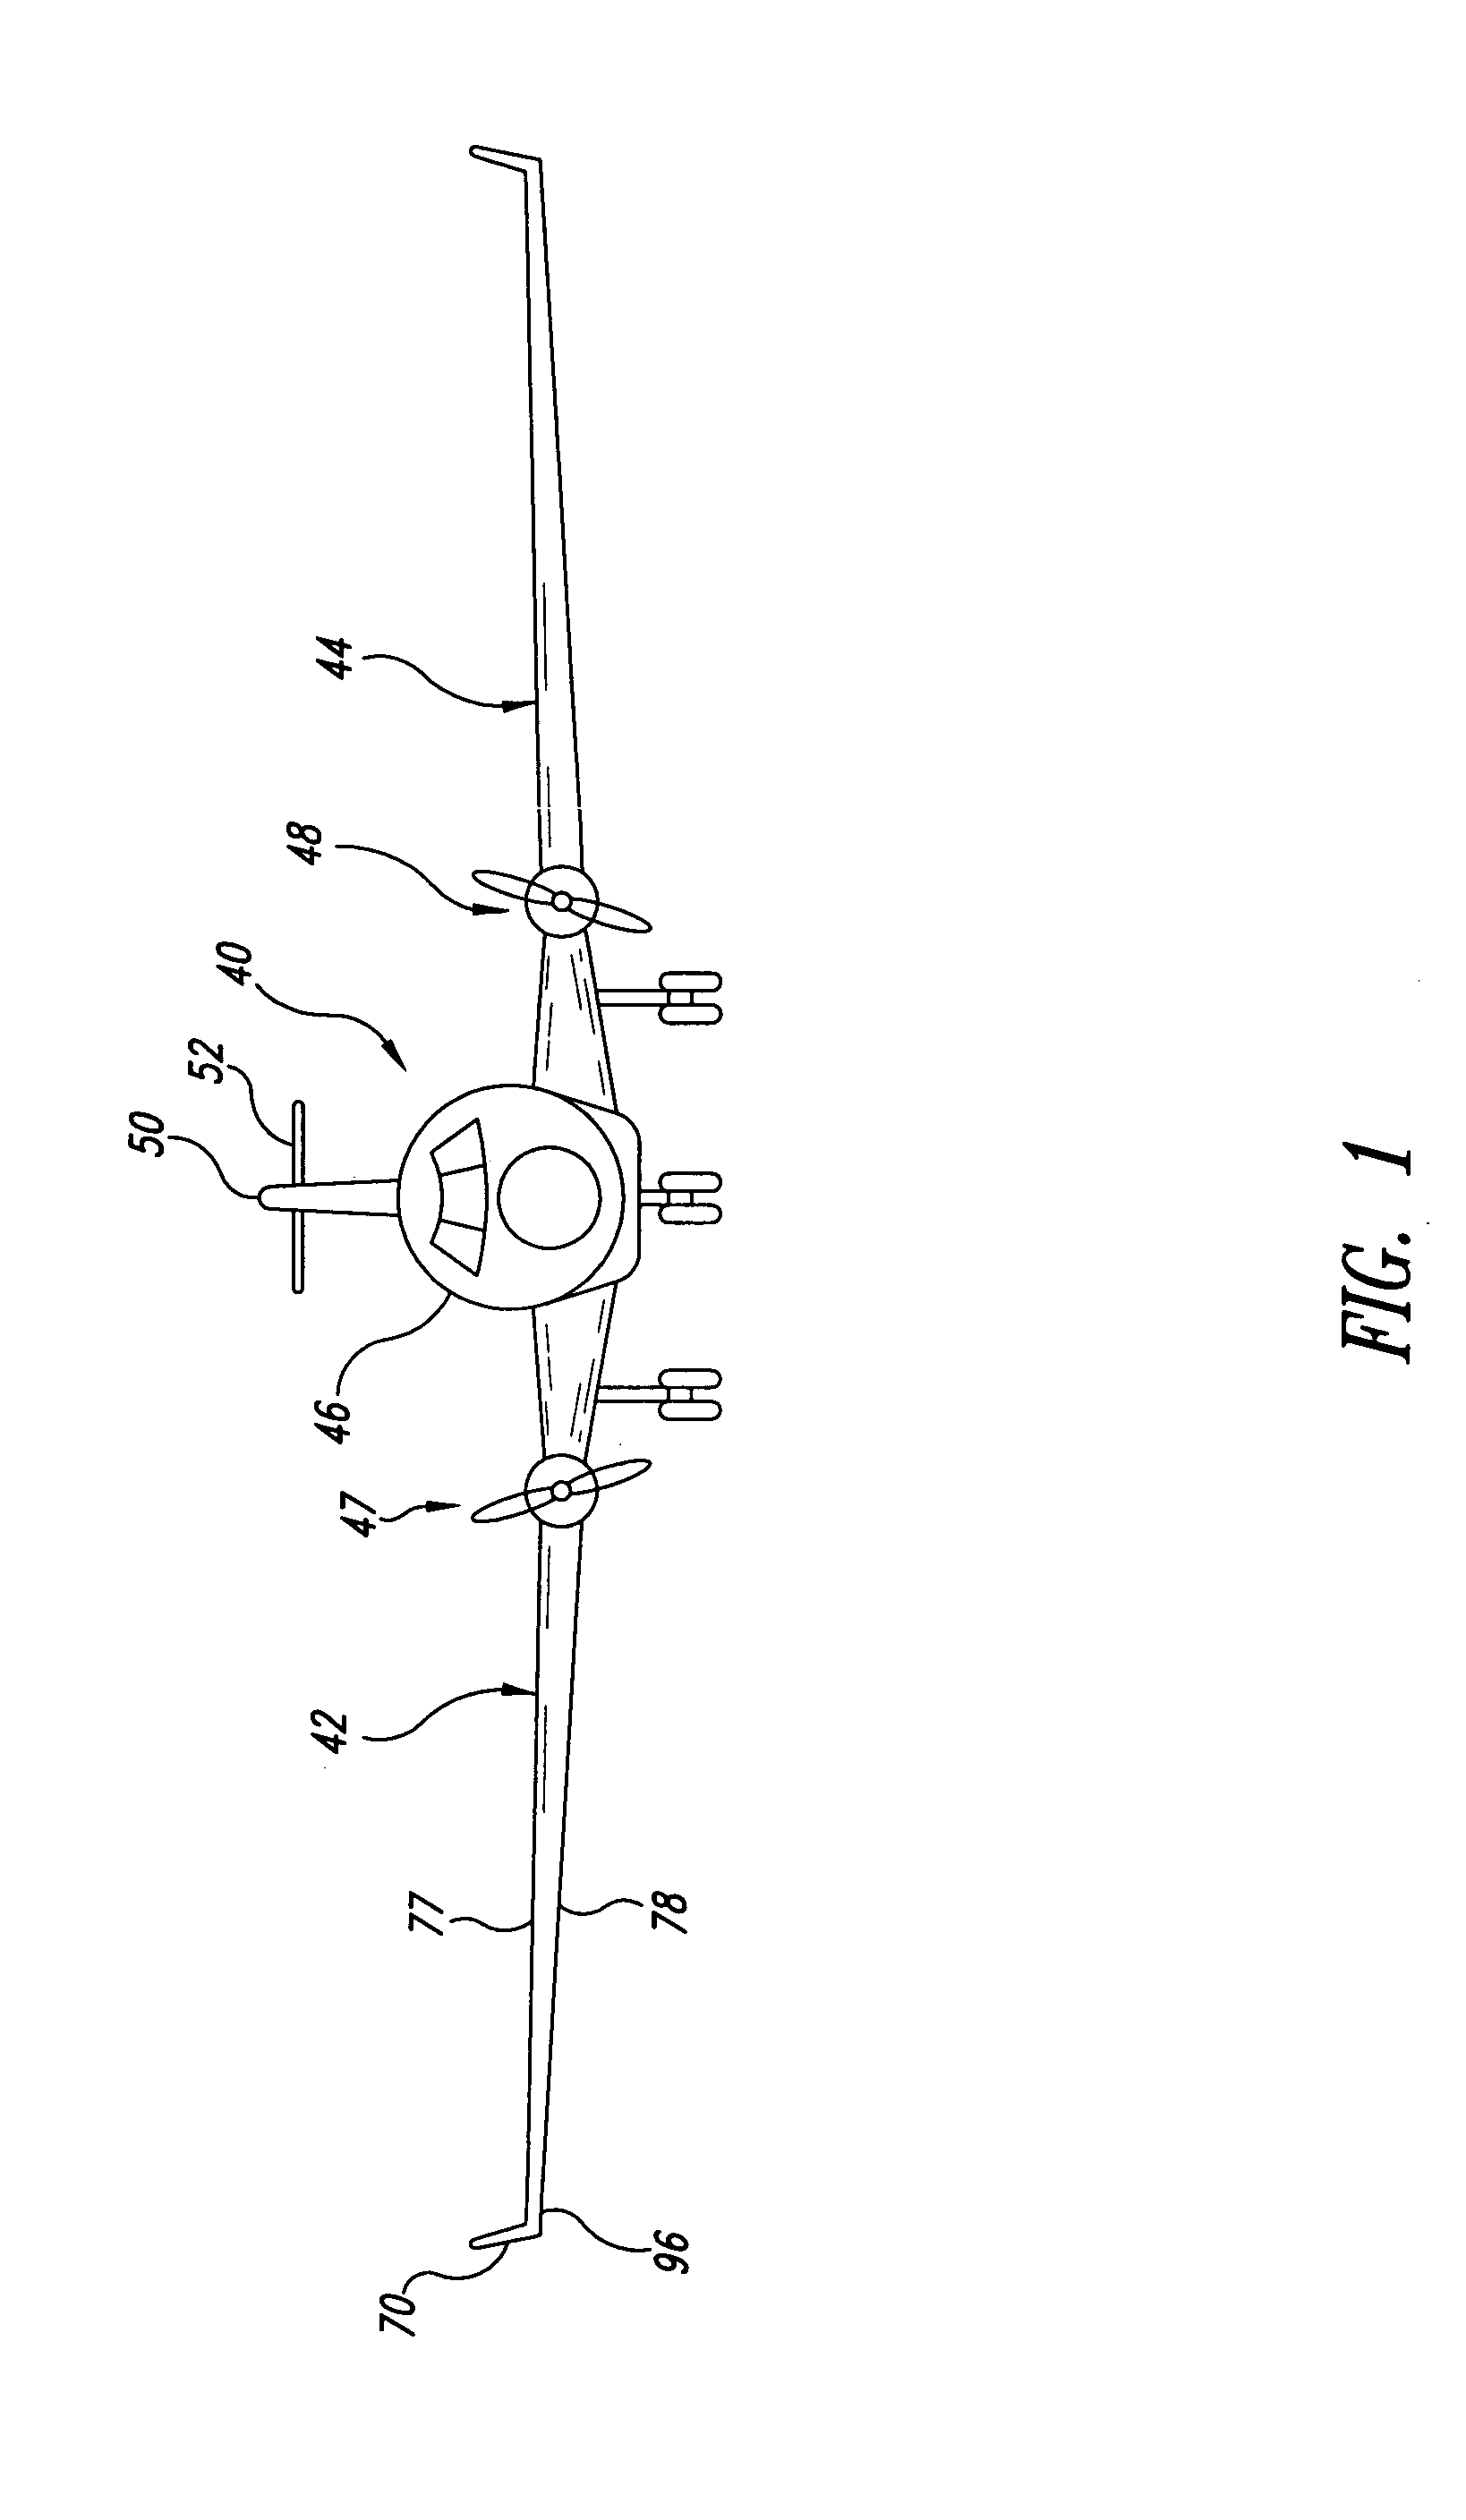 Apparatus and method for use on aircraft with spanwise flow inhibitors